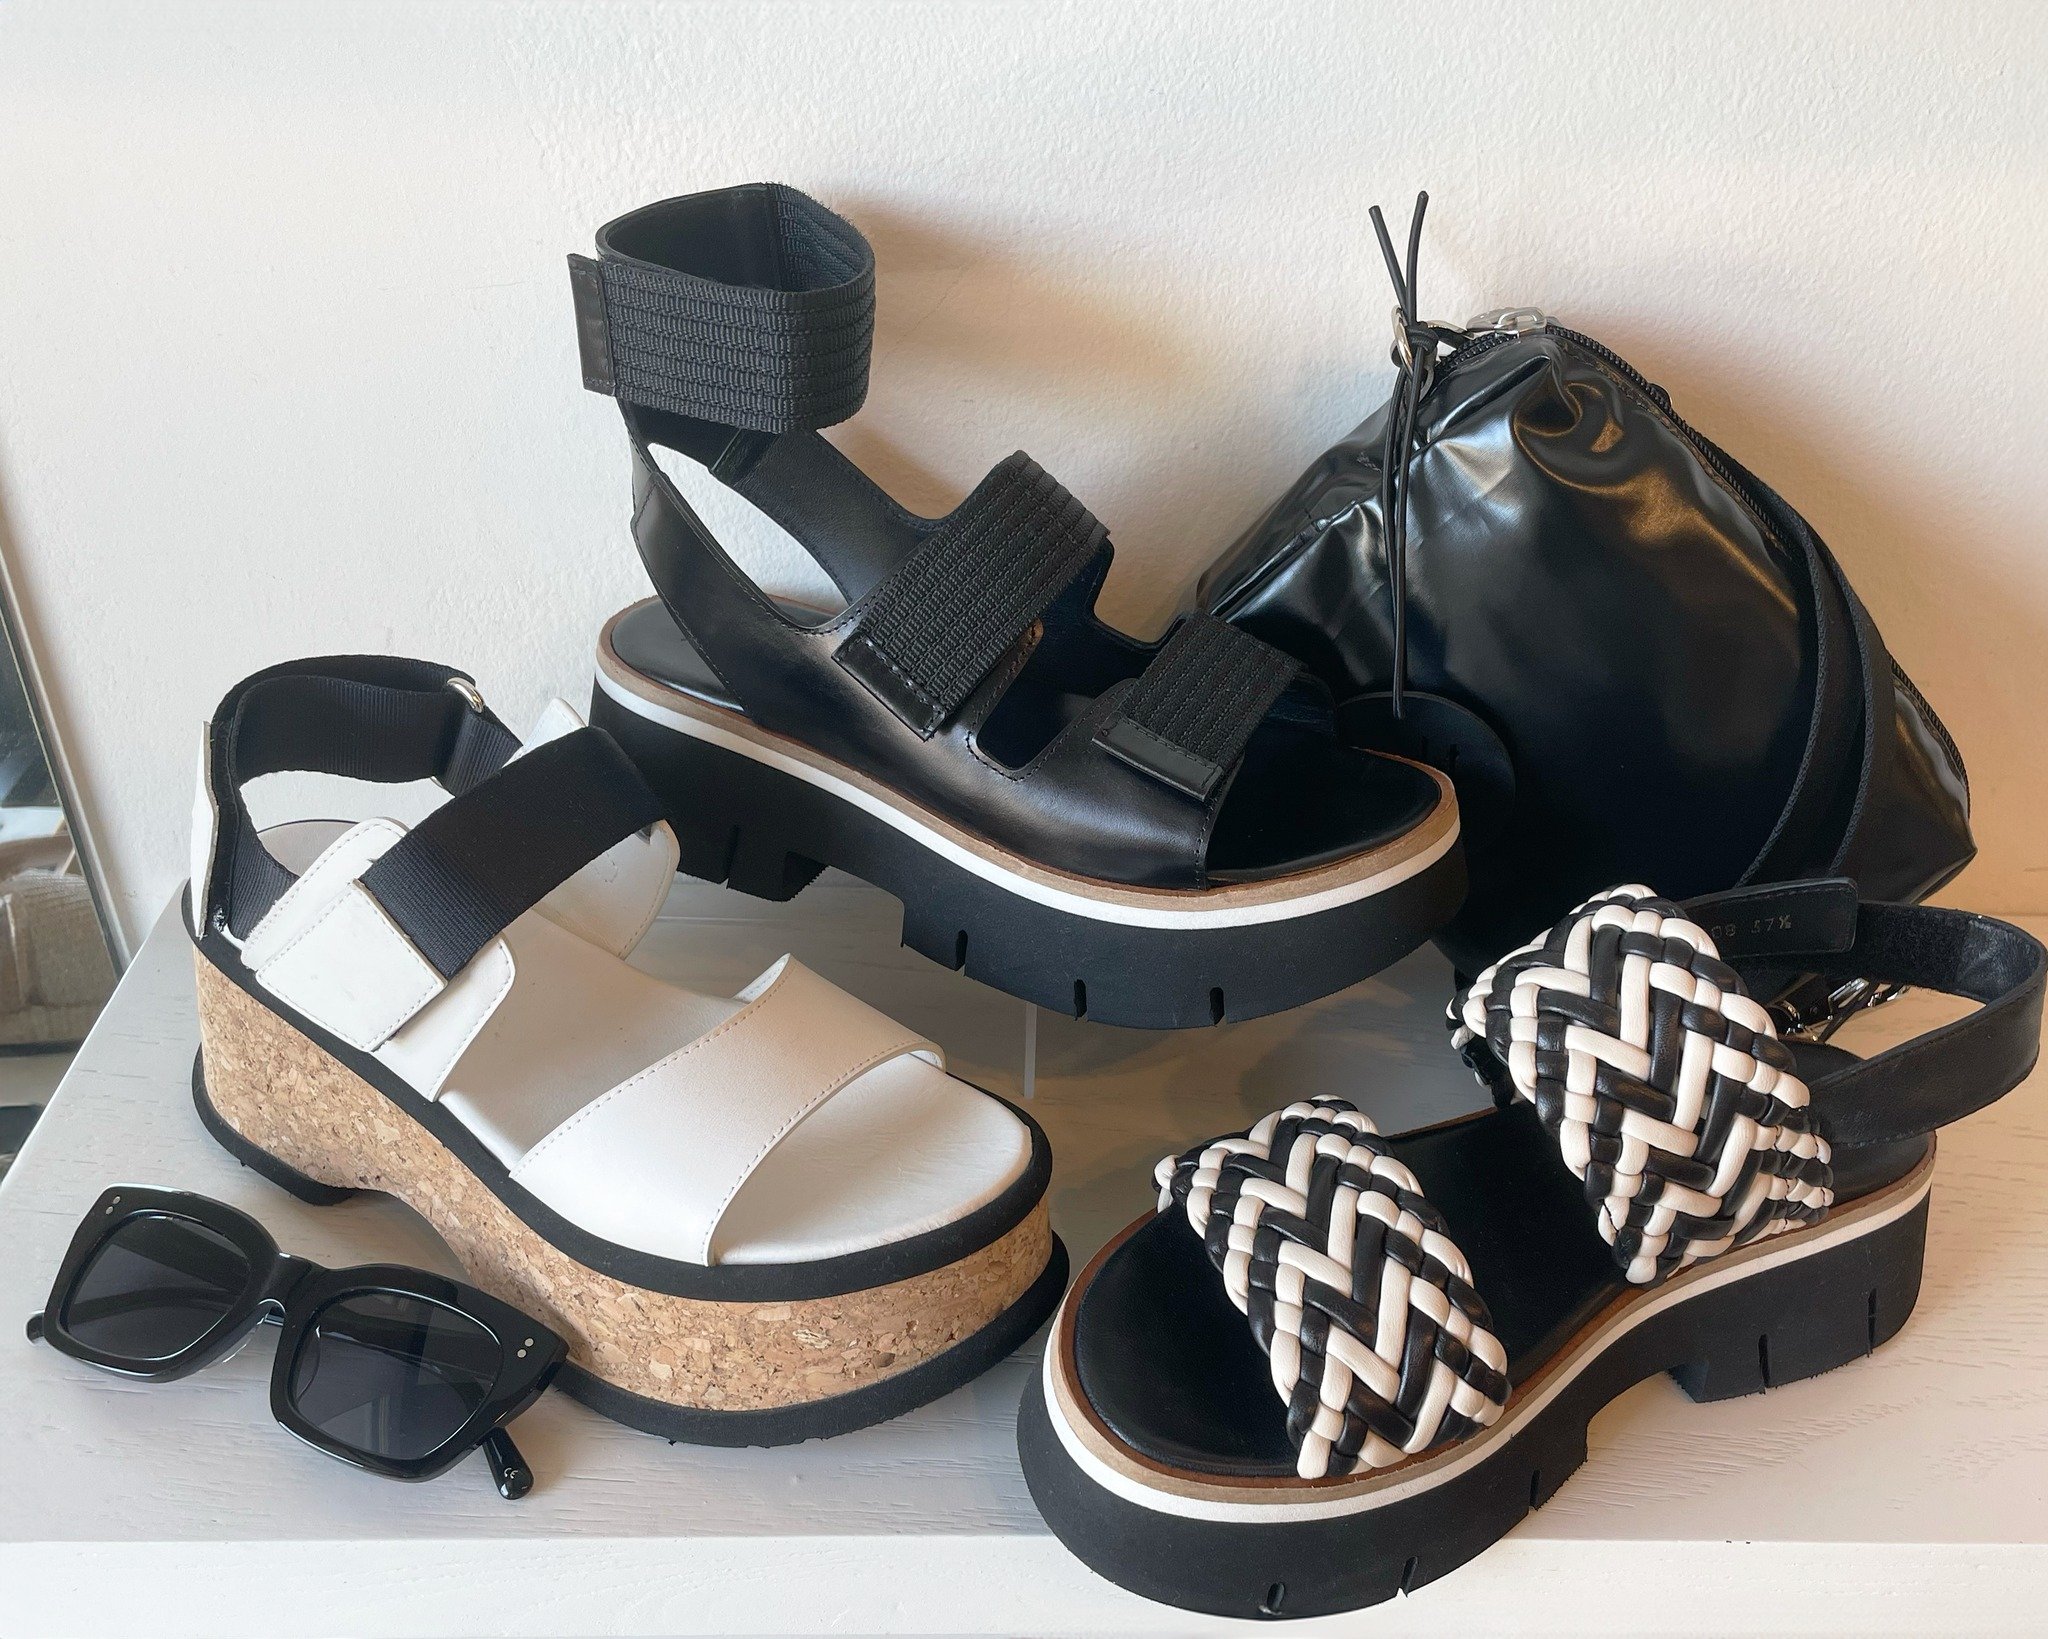 Timeless for a reason. Shop black &amp; white styles new in from Homers, available in-store and online now at Deborah Kent's. 

#deborahkents #southtampastylist #tampashopping #homers #homersshoes #platformsandals #leathersandal #jackgomme #statusanx